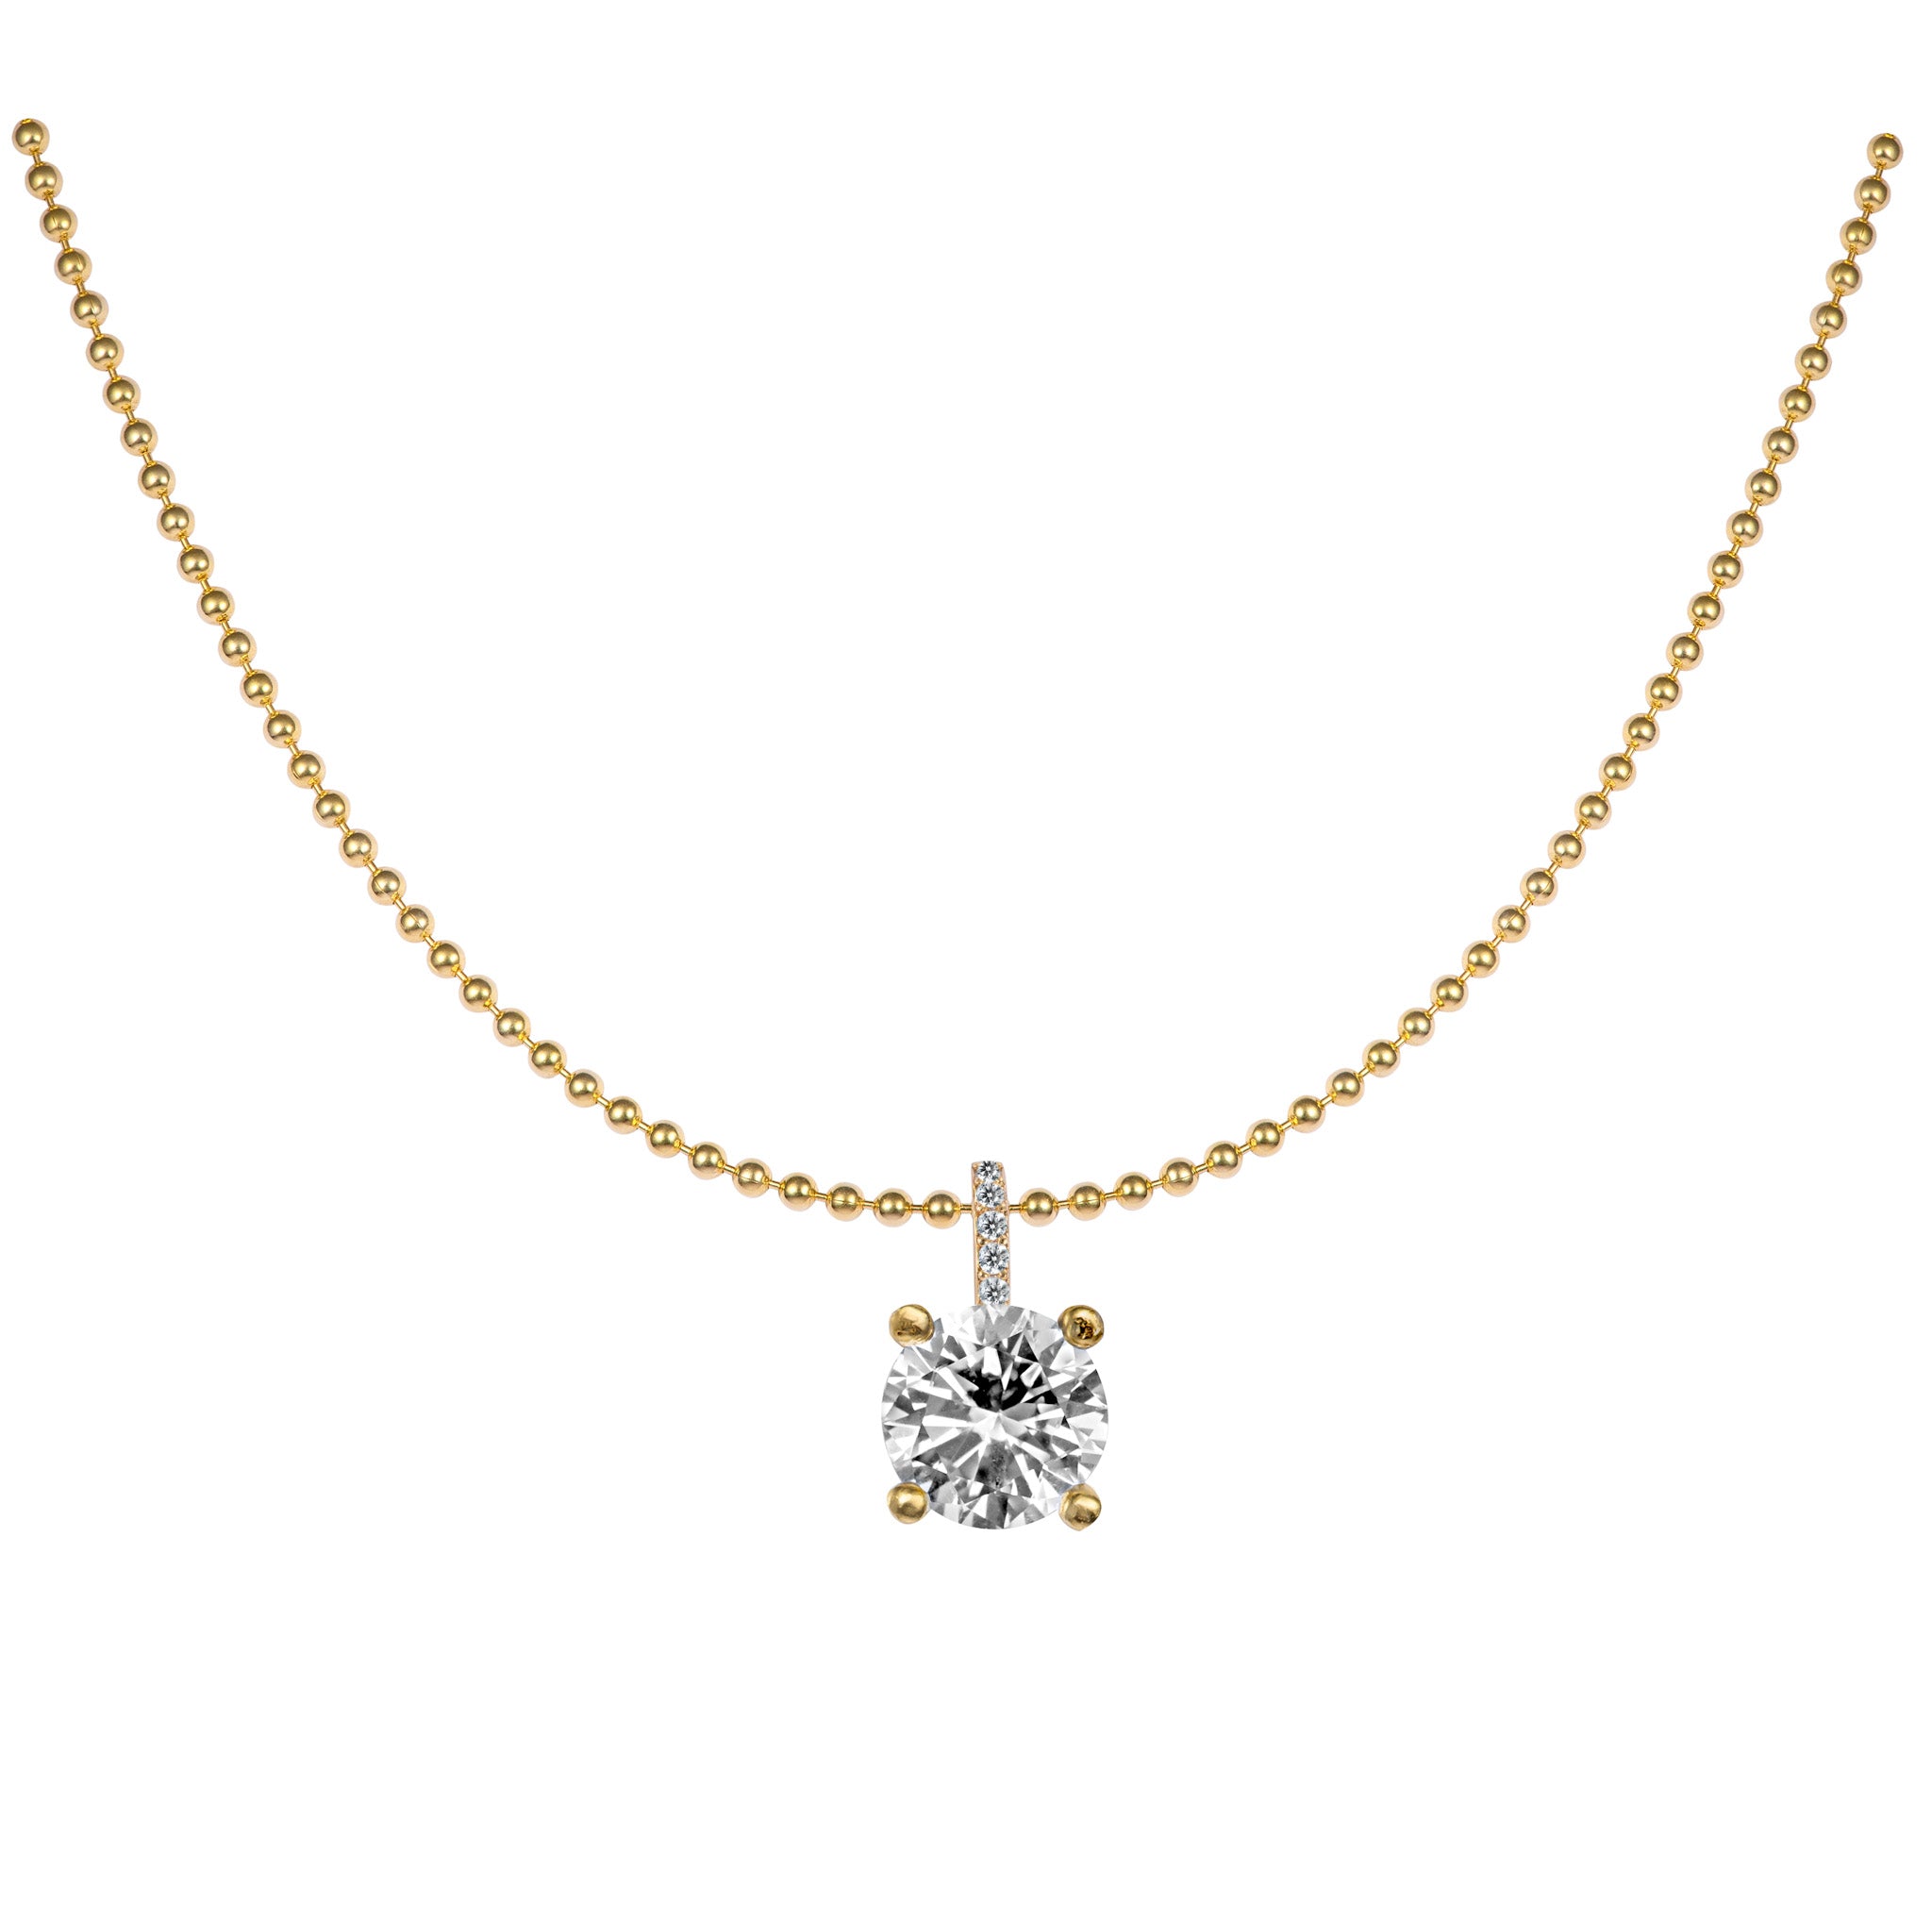 Silver gold plated ball chain "single" charm necklace